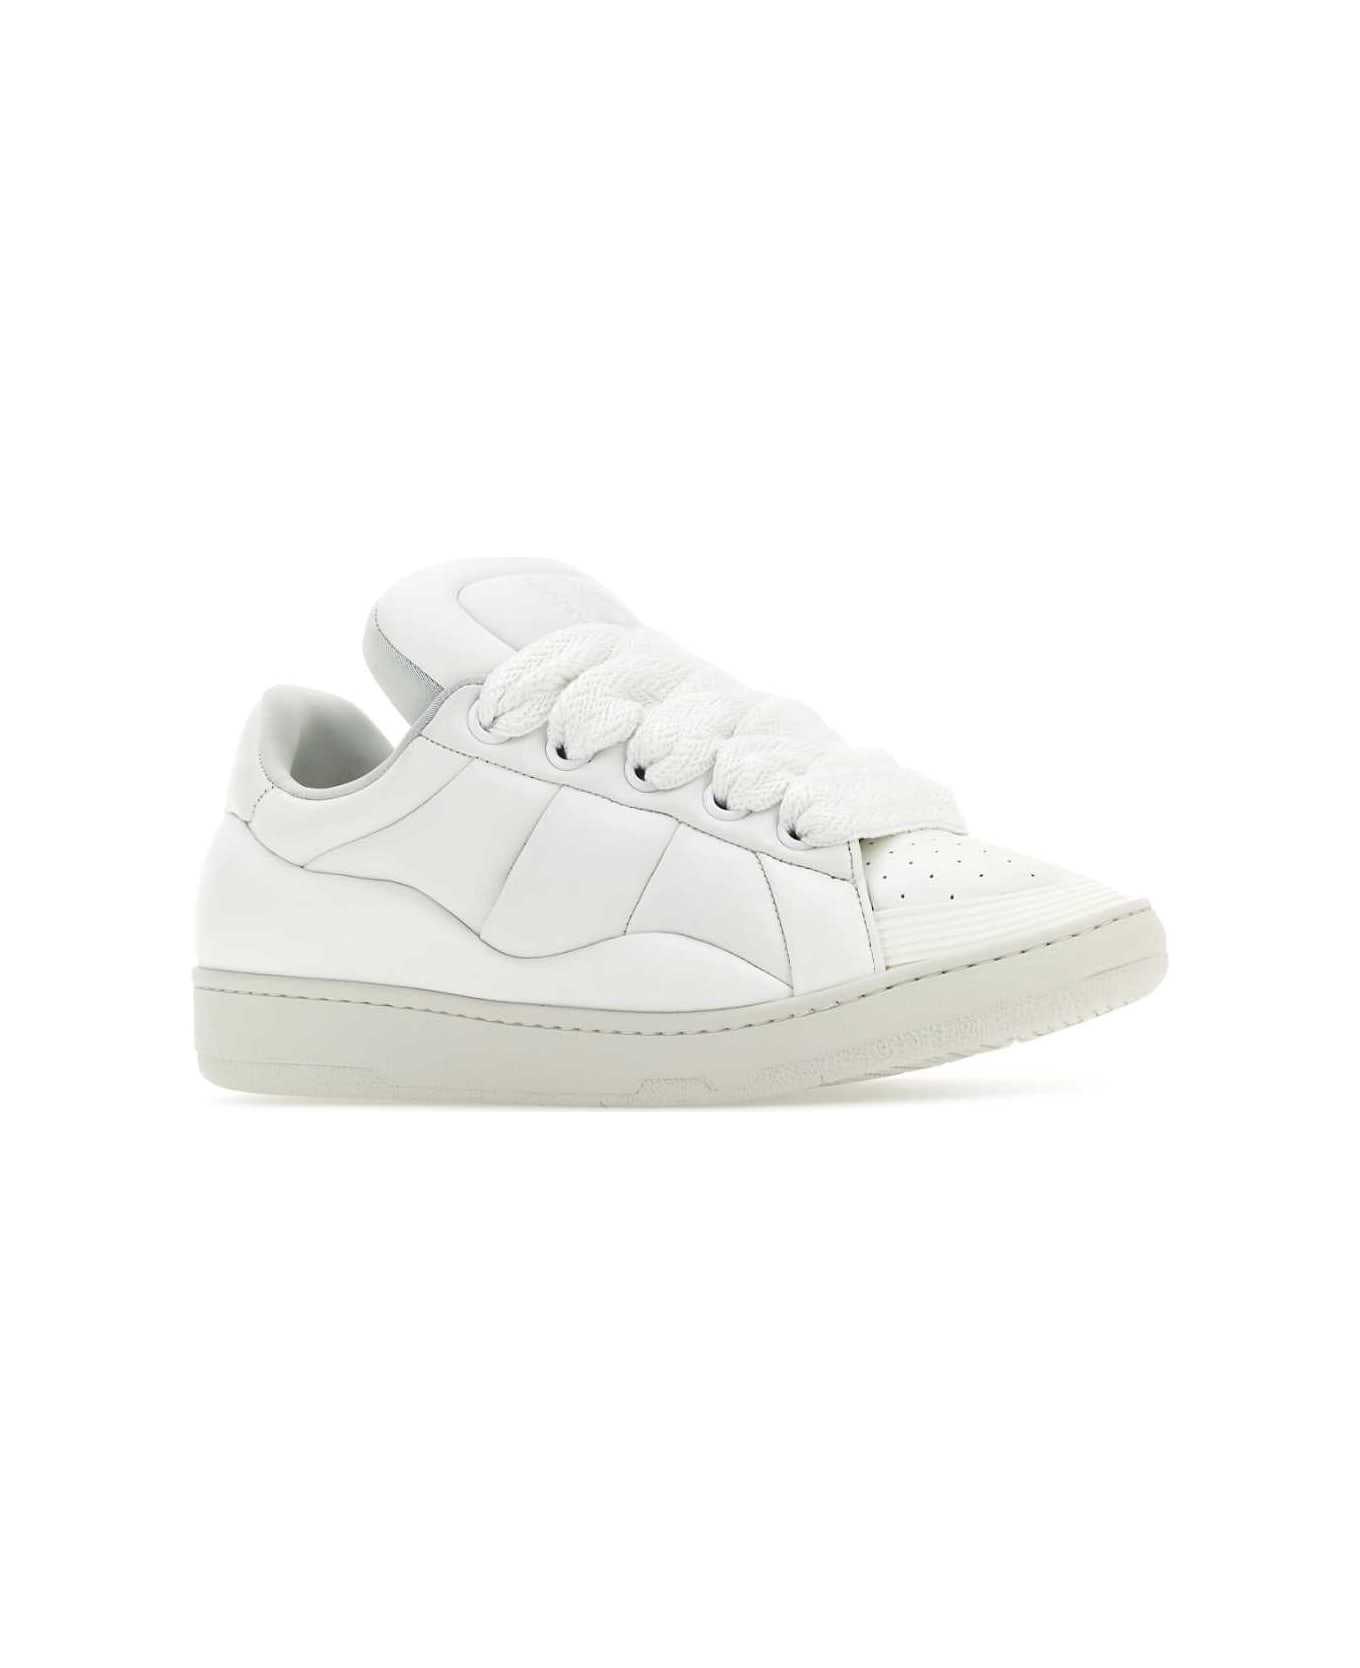 Lanvin White Nappa Leather Curb Xl Sneakers - WHITEWHITE スニーカー